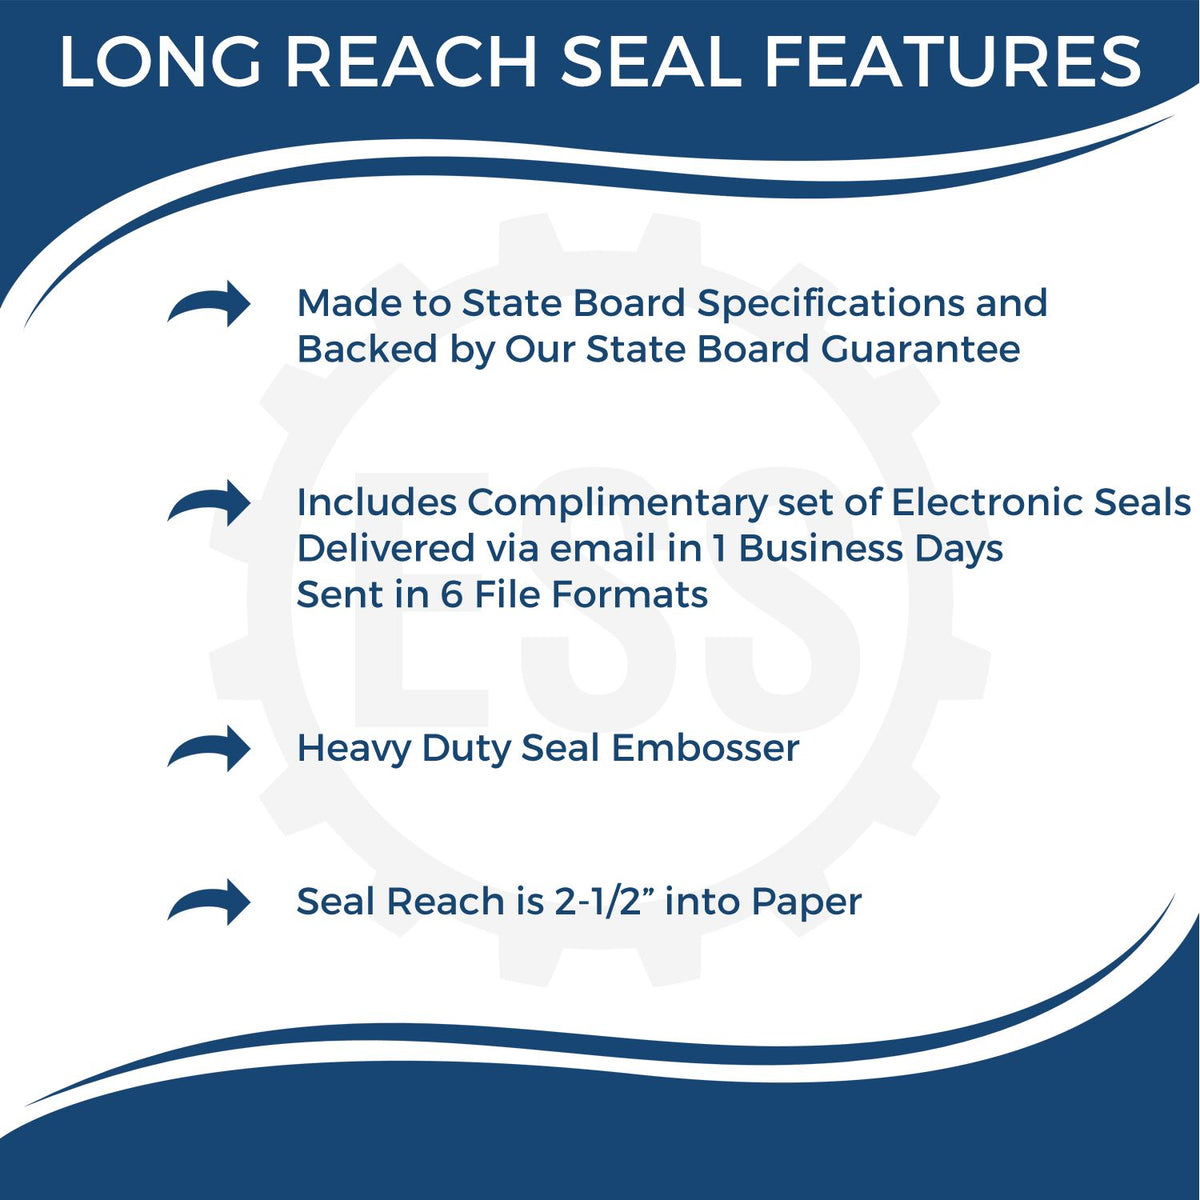 A picture of an infographic highlighting the selling points for the Long Reach Alaska PE Seal